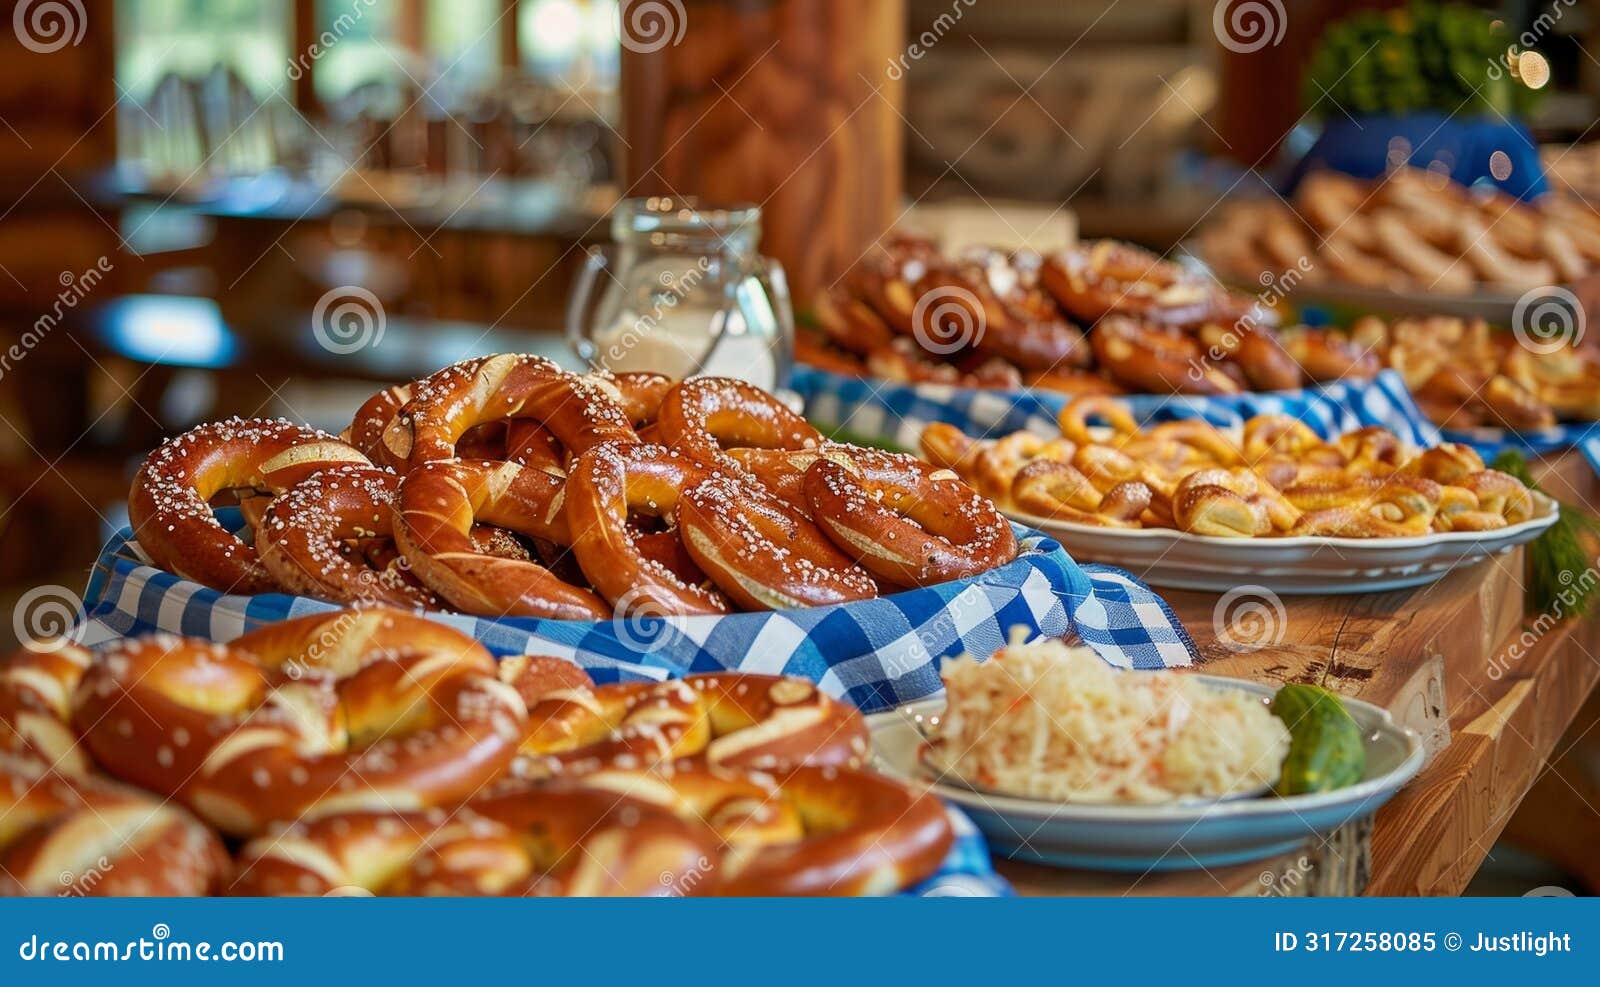 wooden tables decorated with blue and white checkered tablecloths adorned with overflowing platters of bratwurst